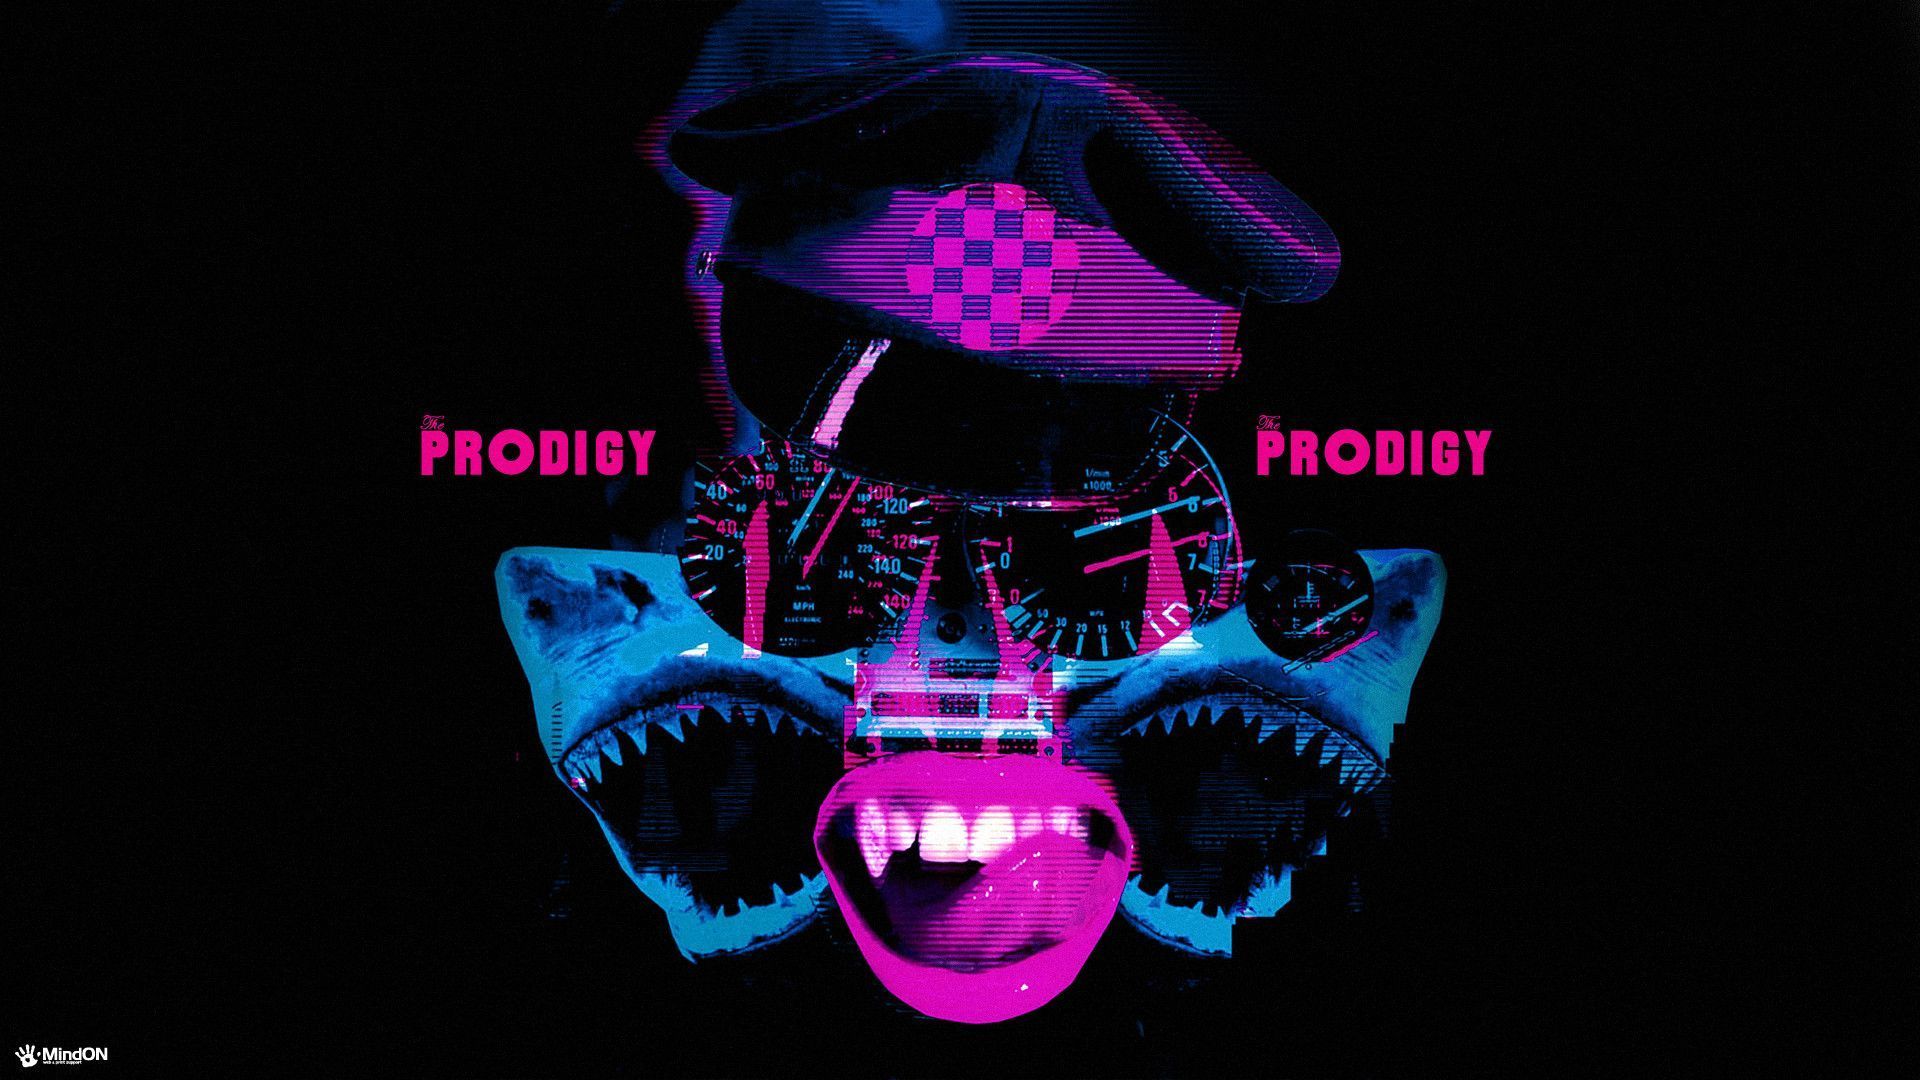 New Wallpapers Up For Download The Prodigy Fanboy - Liam Howlett